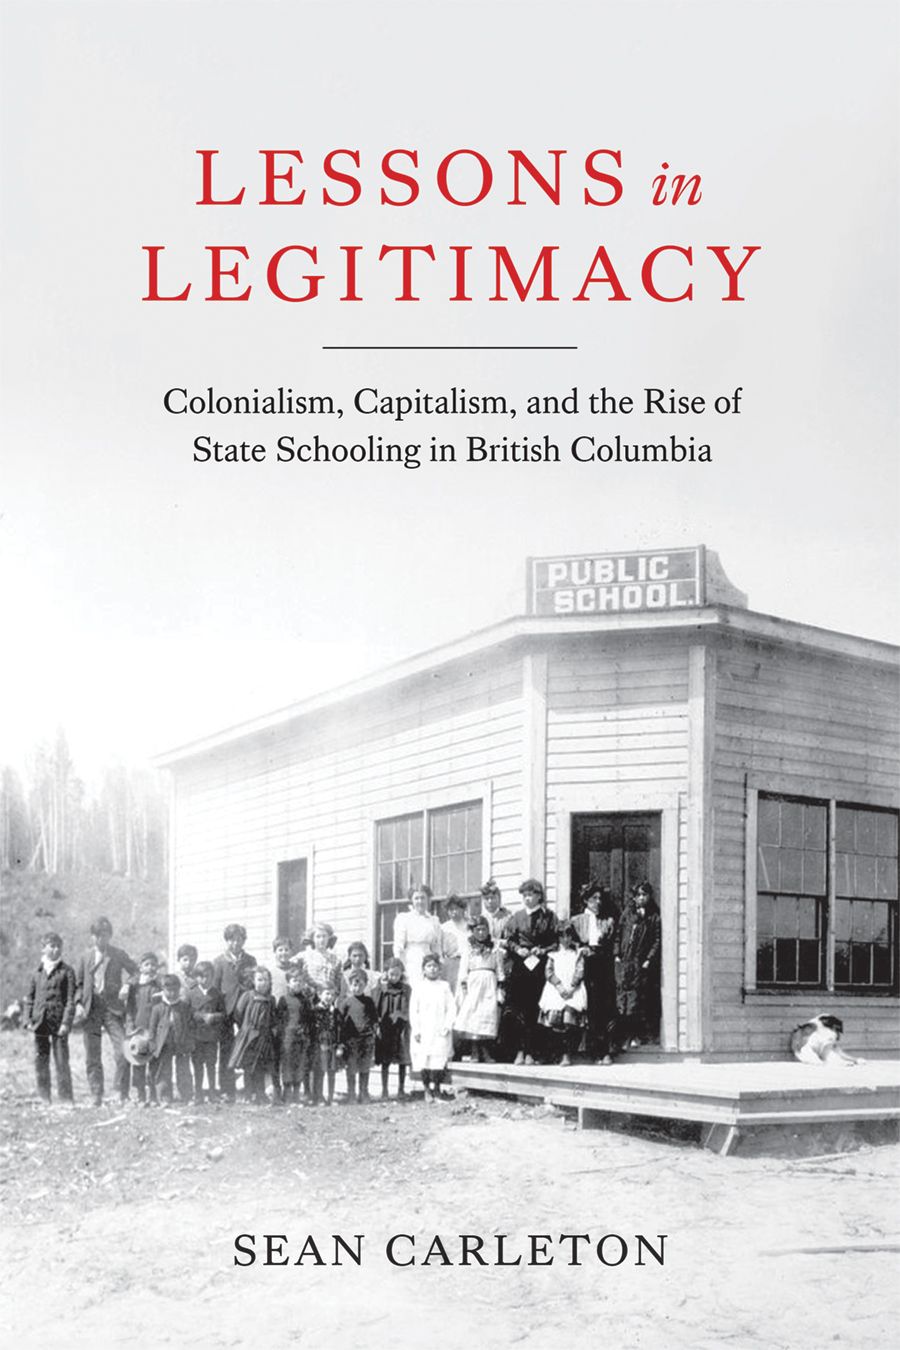 The Blundering Generations and the Crises of Legitimacy - RECKONIN